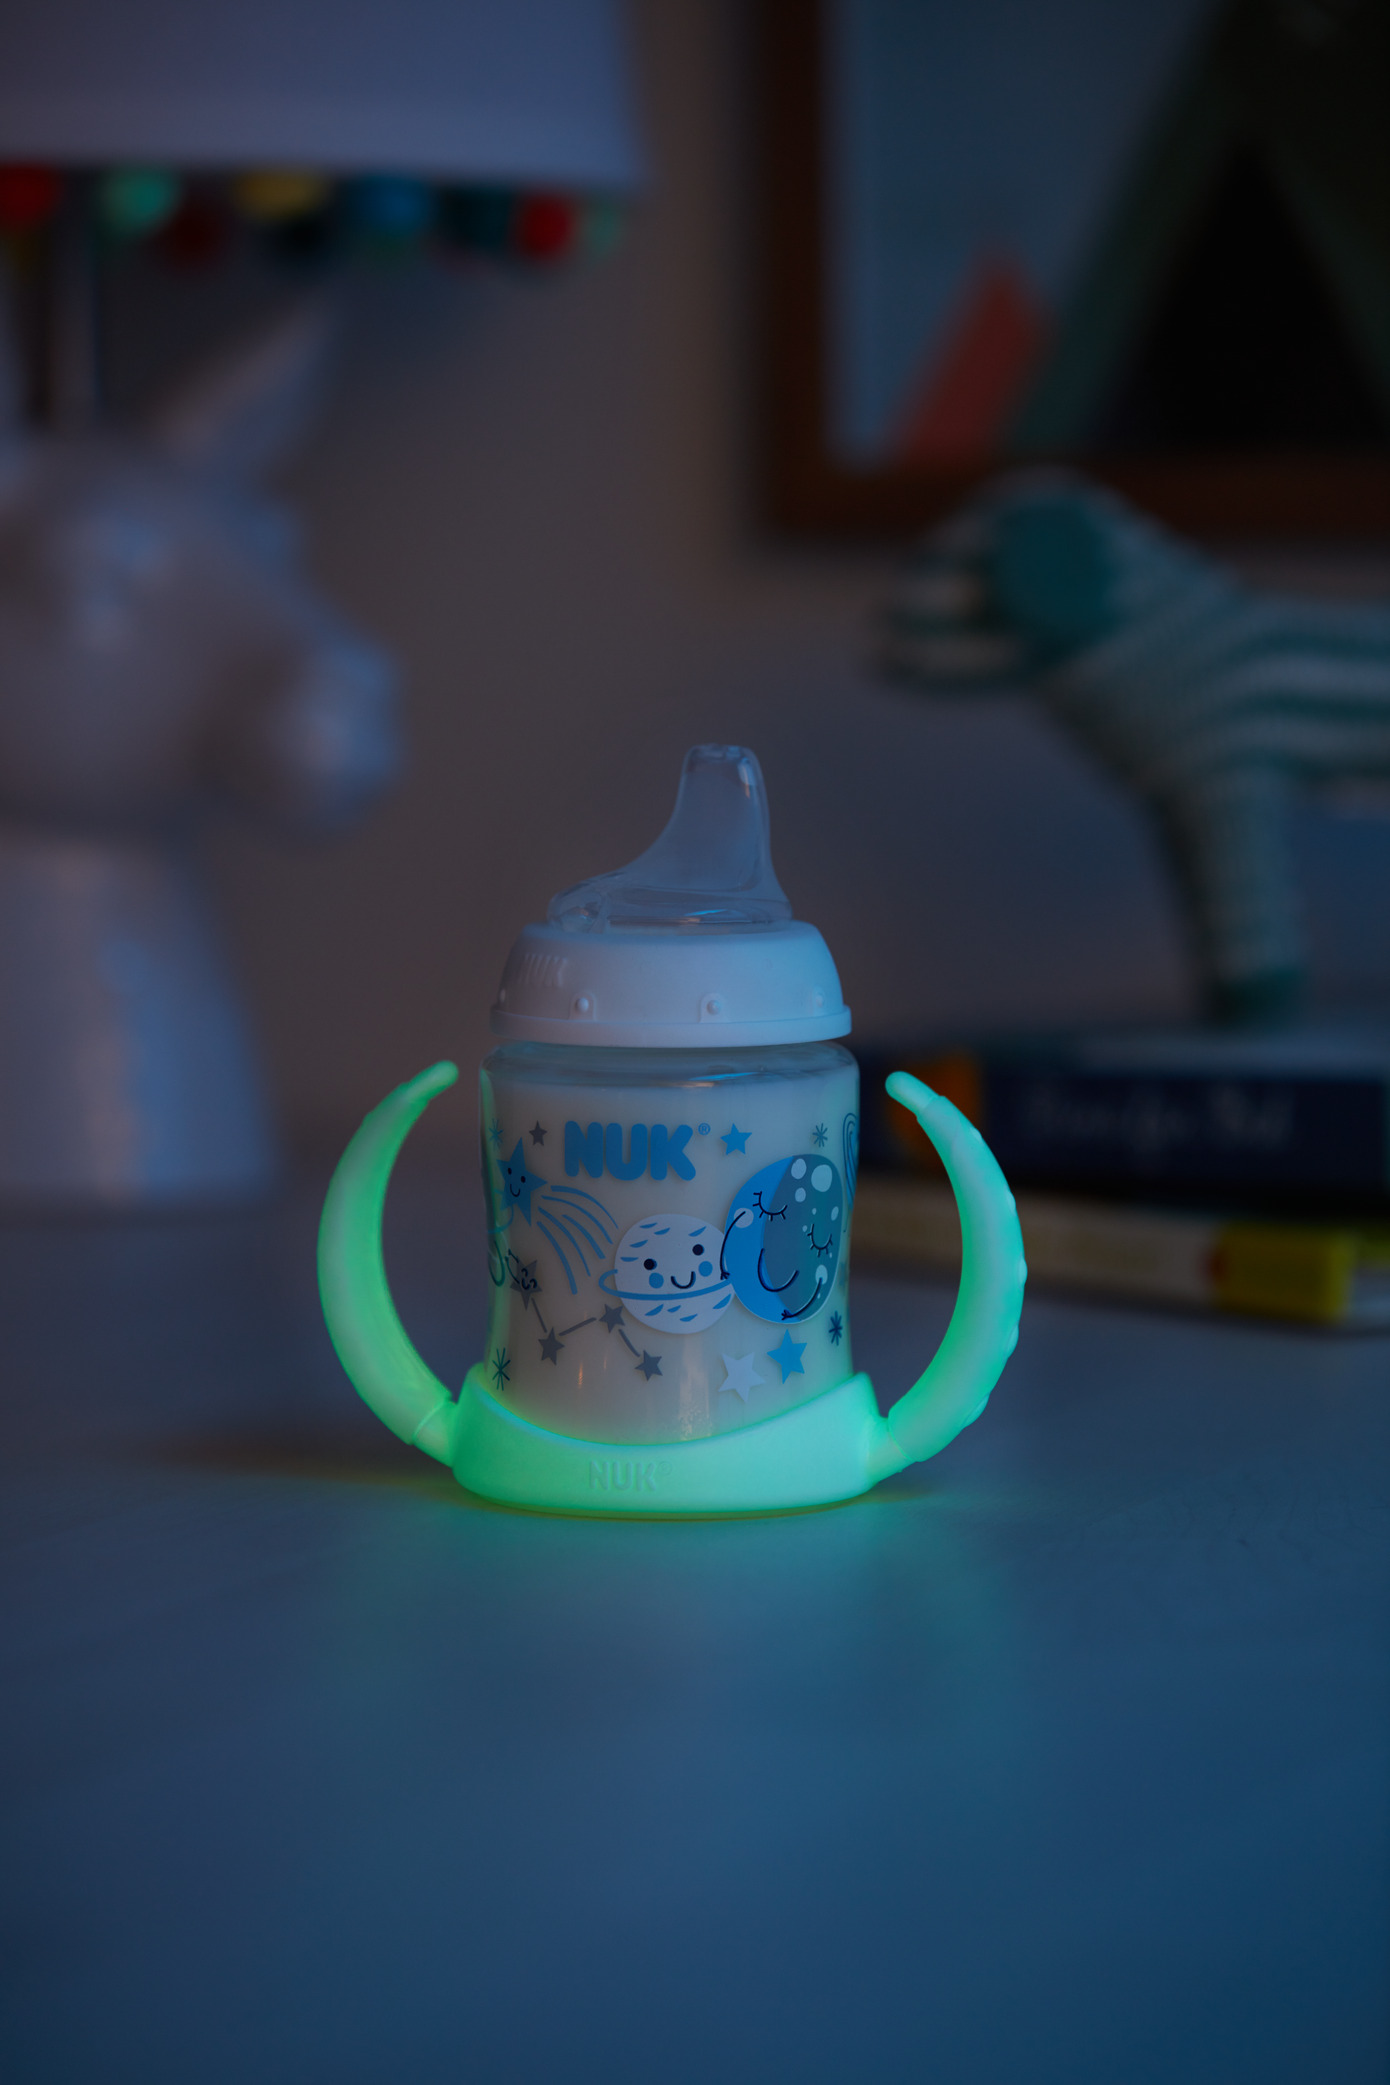 NUK® Cup 69825 Learner Glow In The Dark, 5OZ Product Image 2 of 9